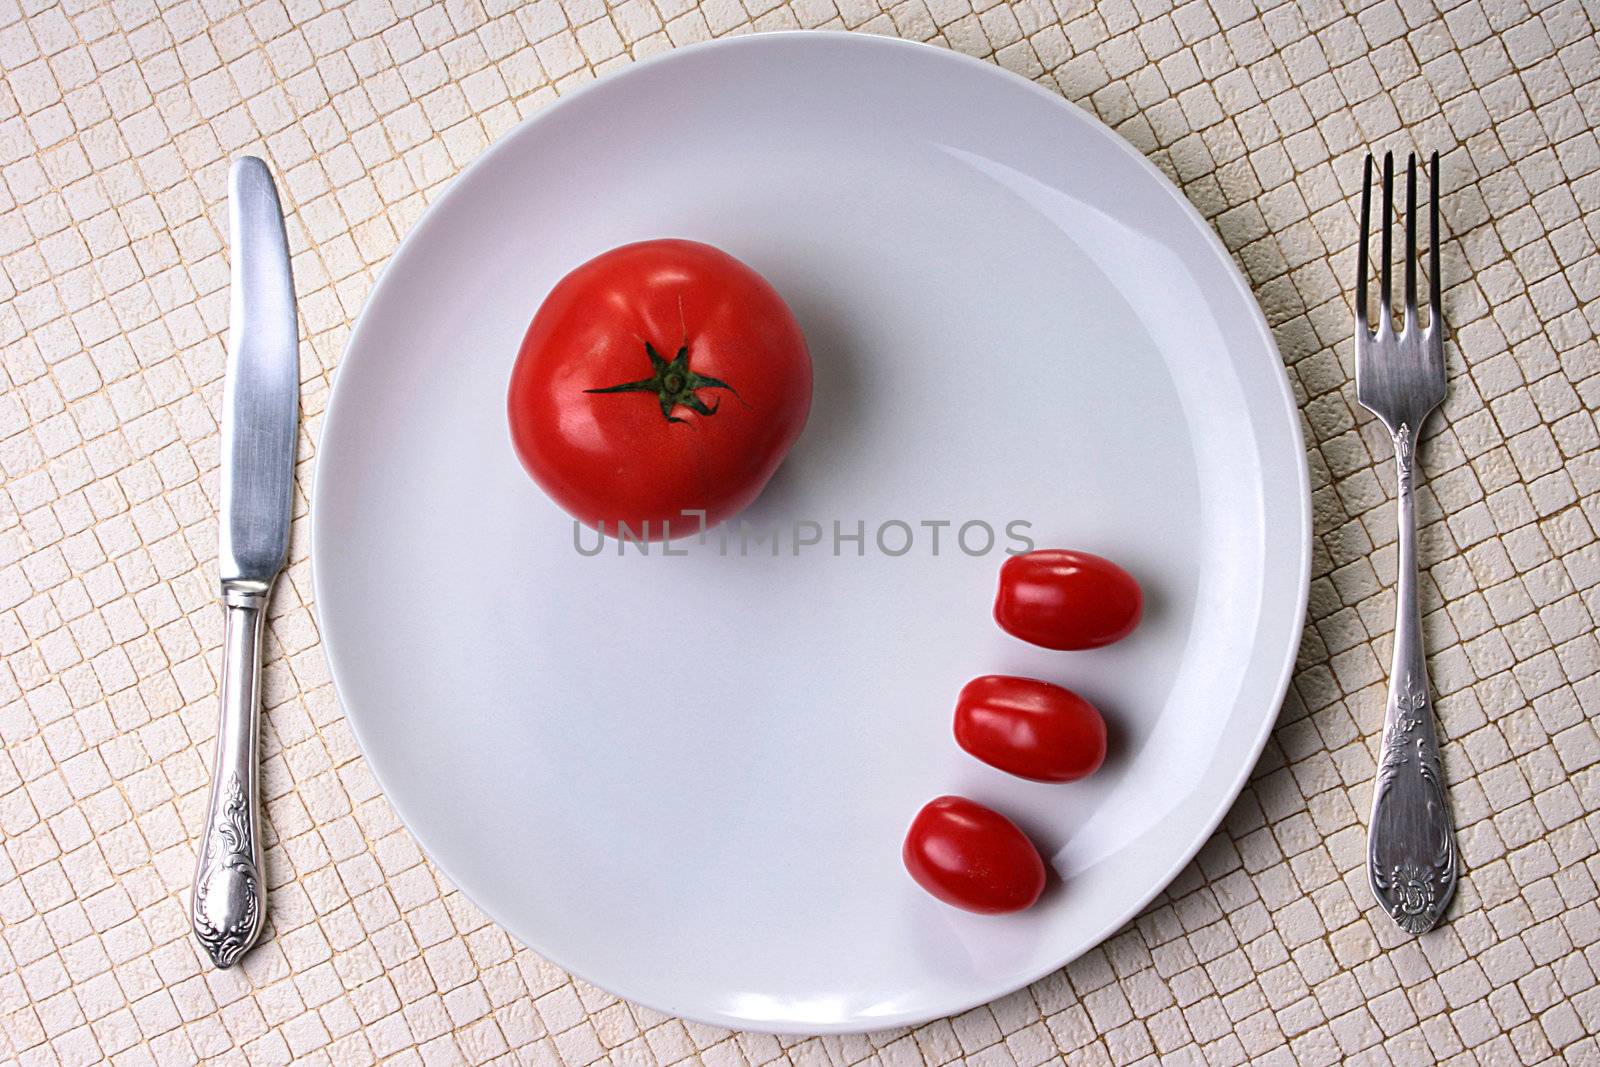 Three small and one big tomato on plate with fork and knife.